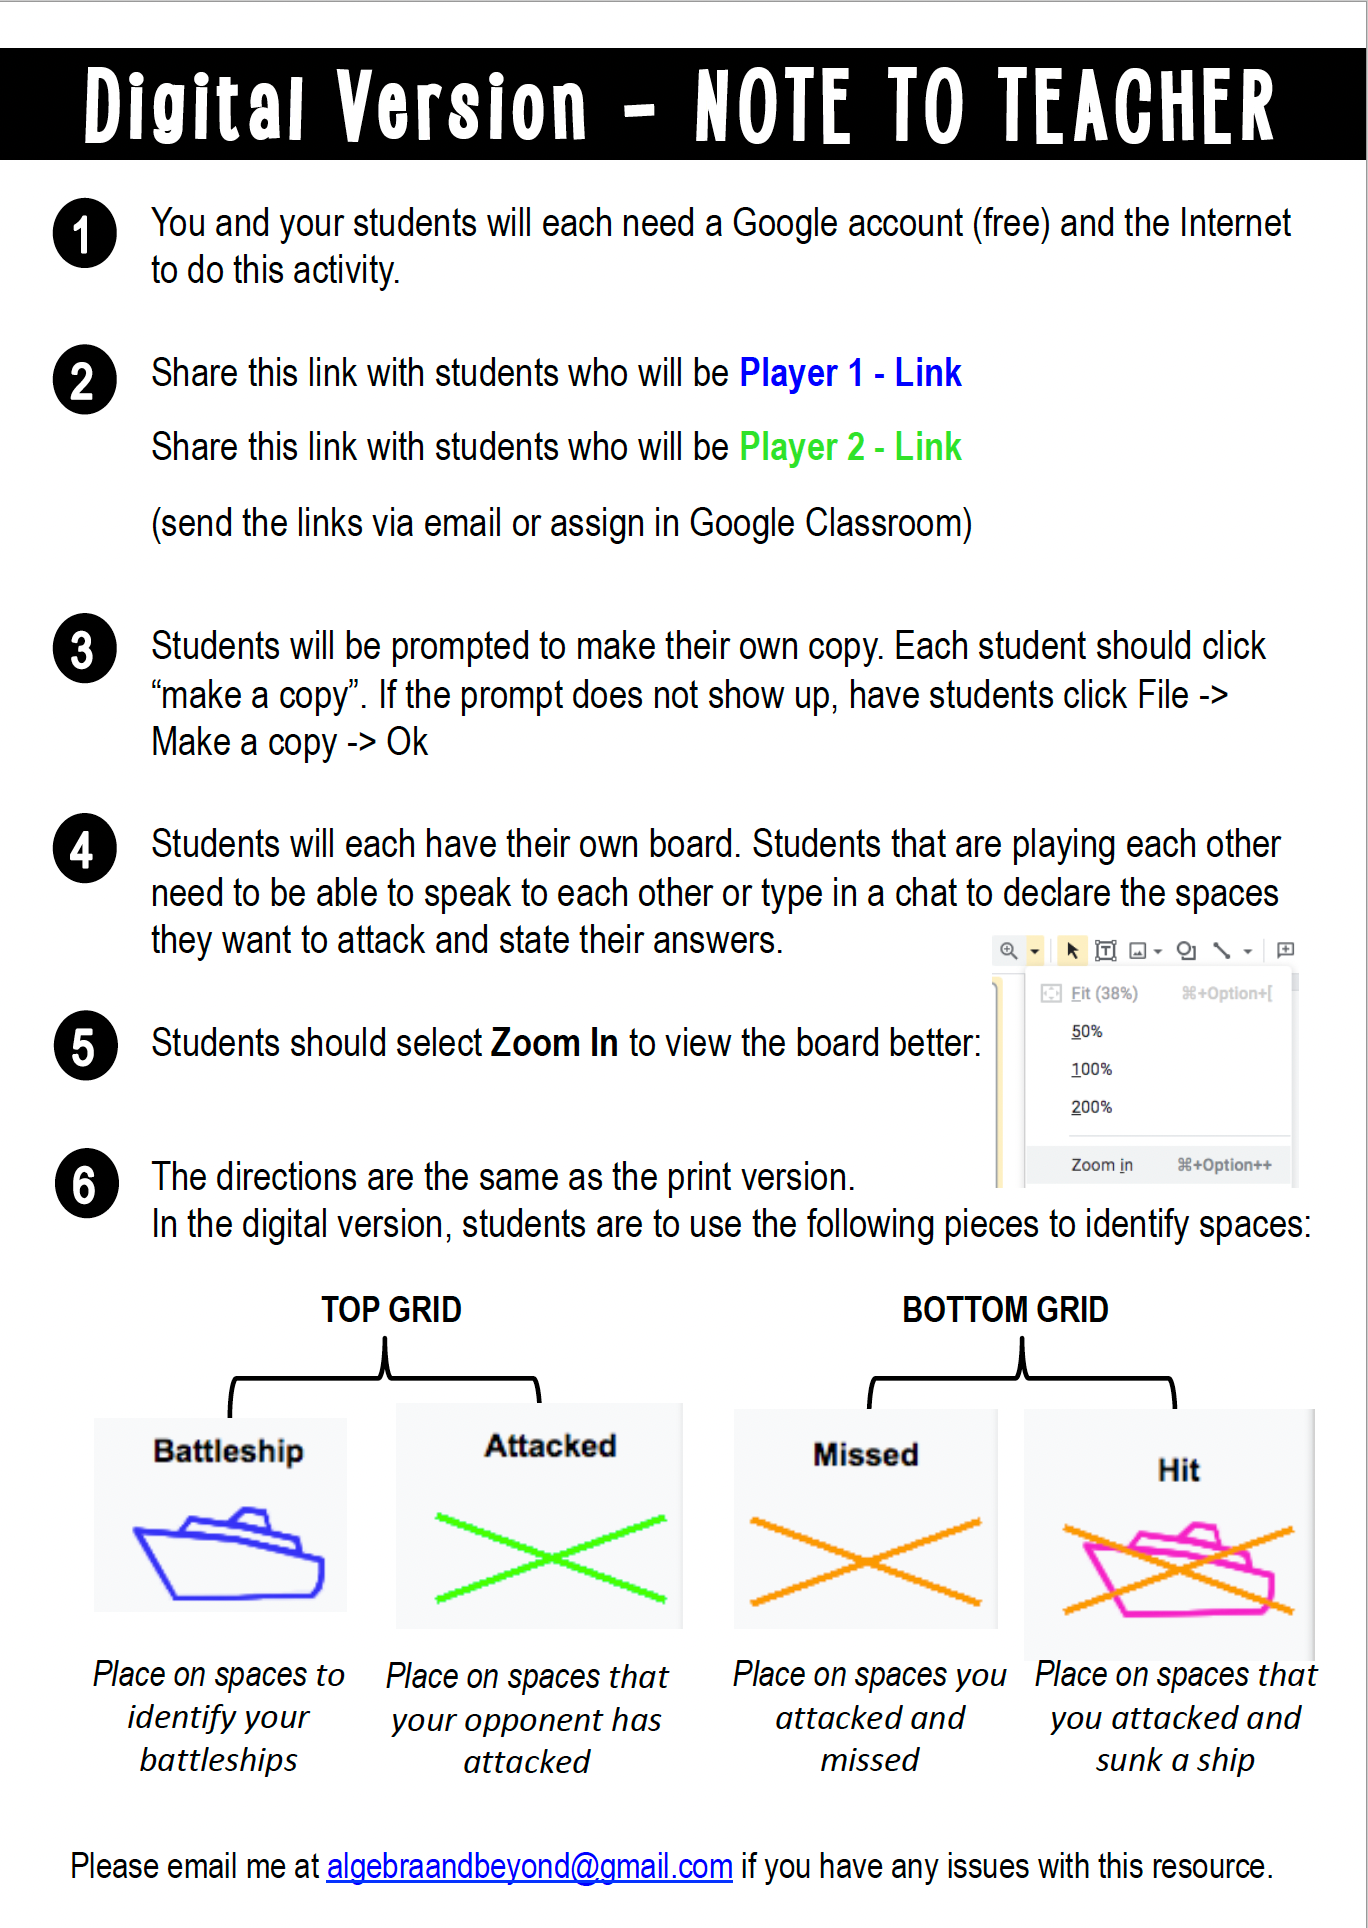 Exponent Rules Activity | Power and Product Rules | Battle My Math Ship